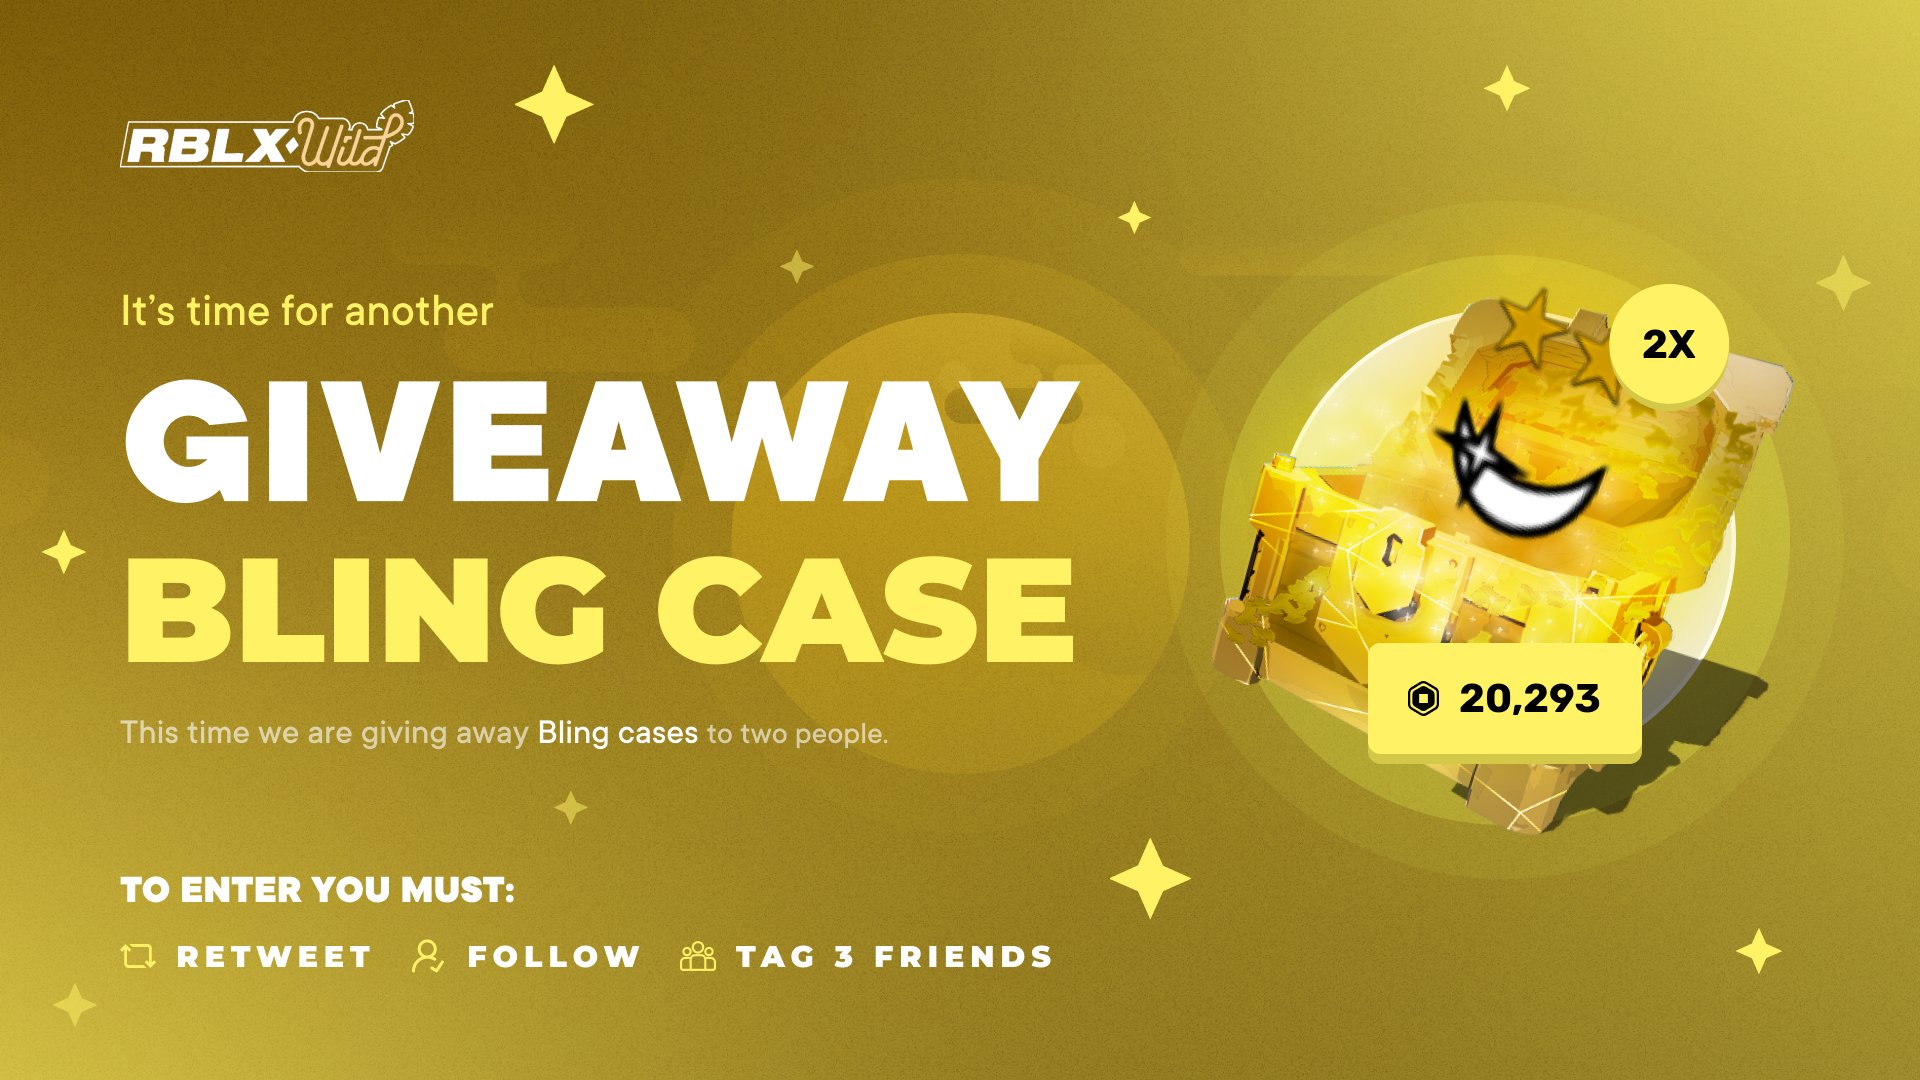 RBLXWild on X: We are giving away 2 Clock Work Cases to 2 people